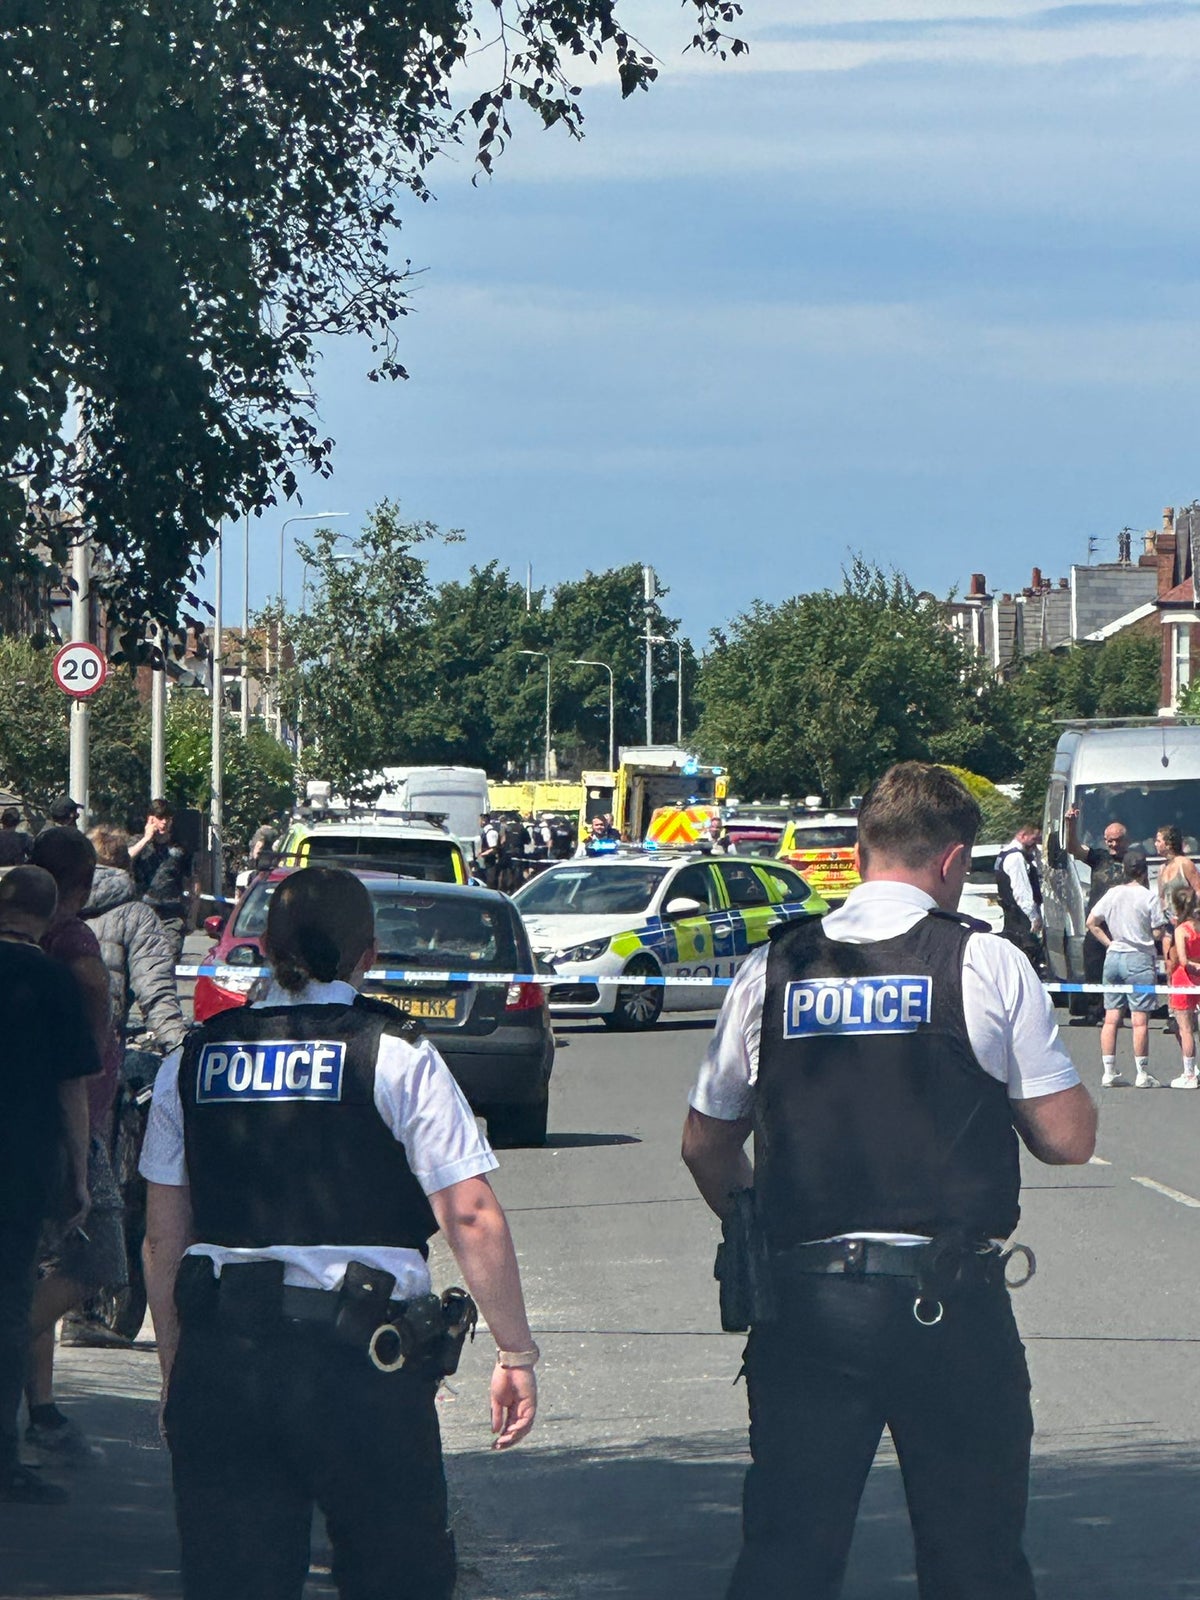 Southport stabbing latest: Children among eight injured in major incident as police arrest man